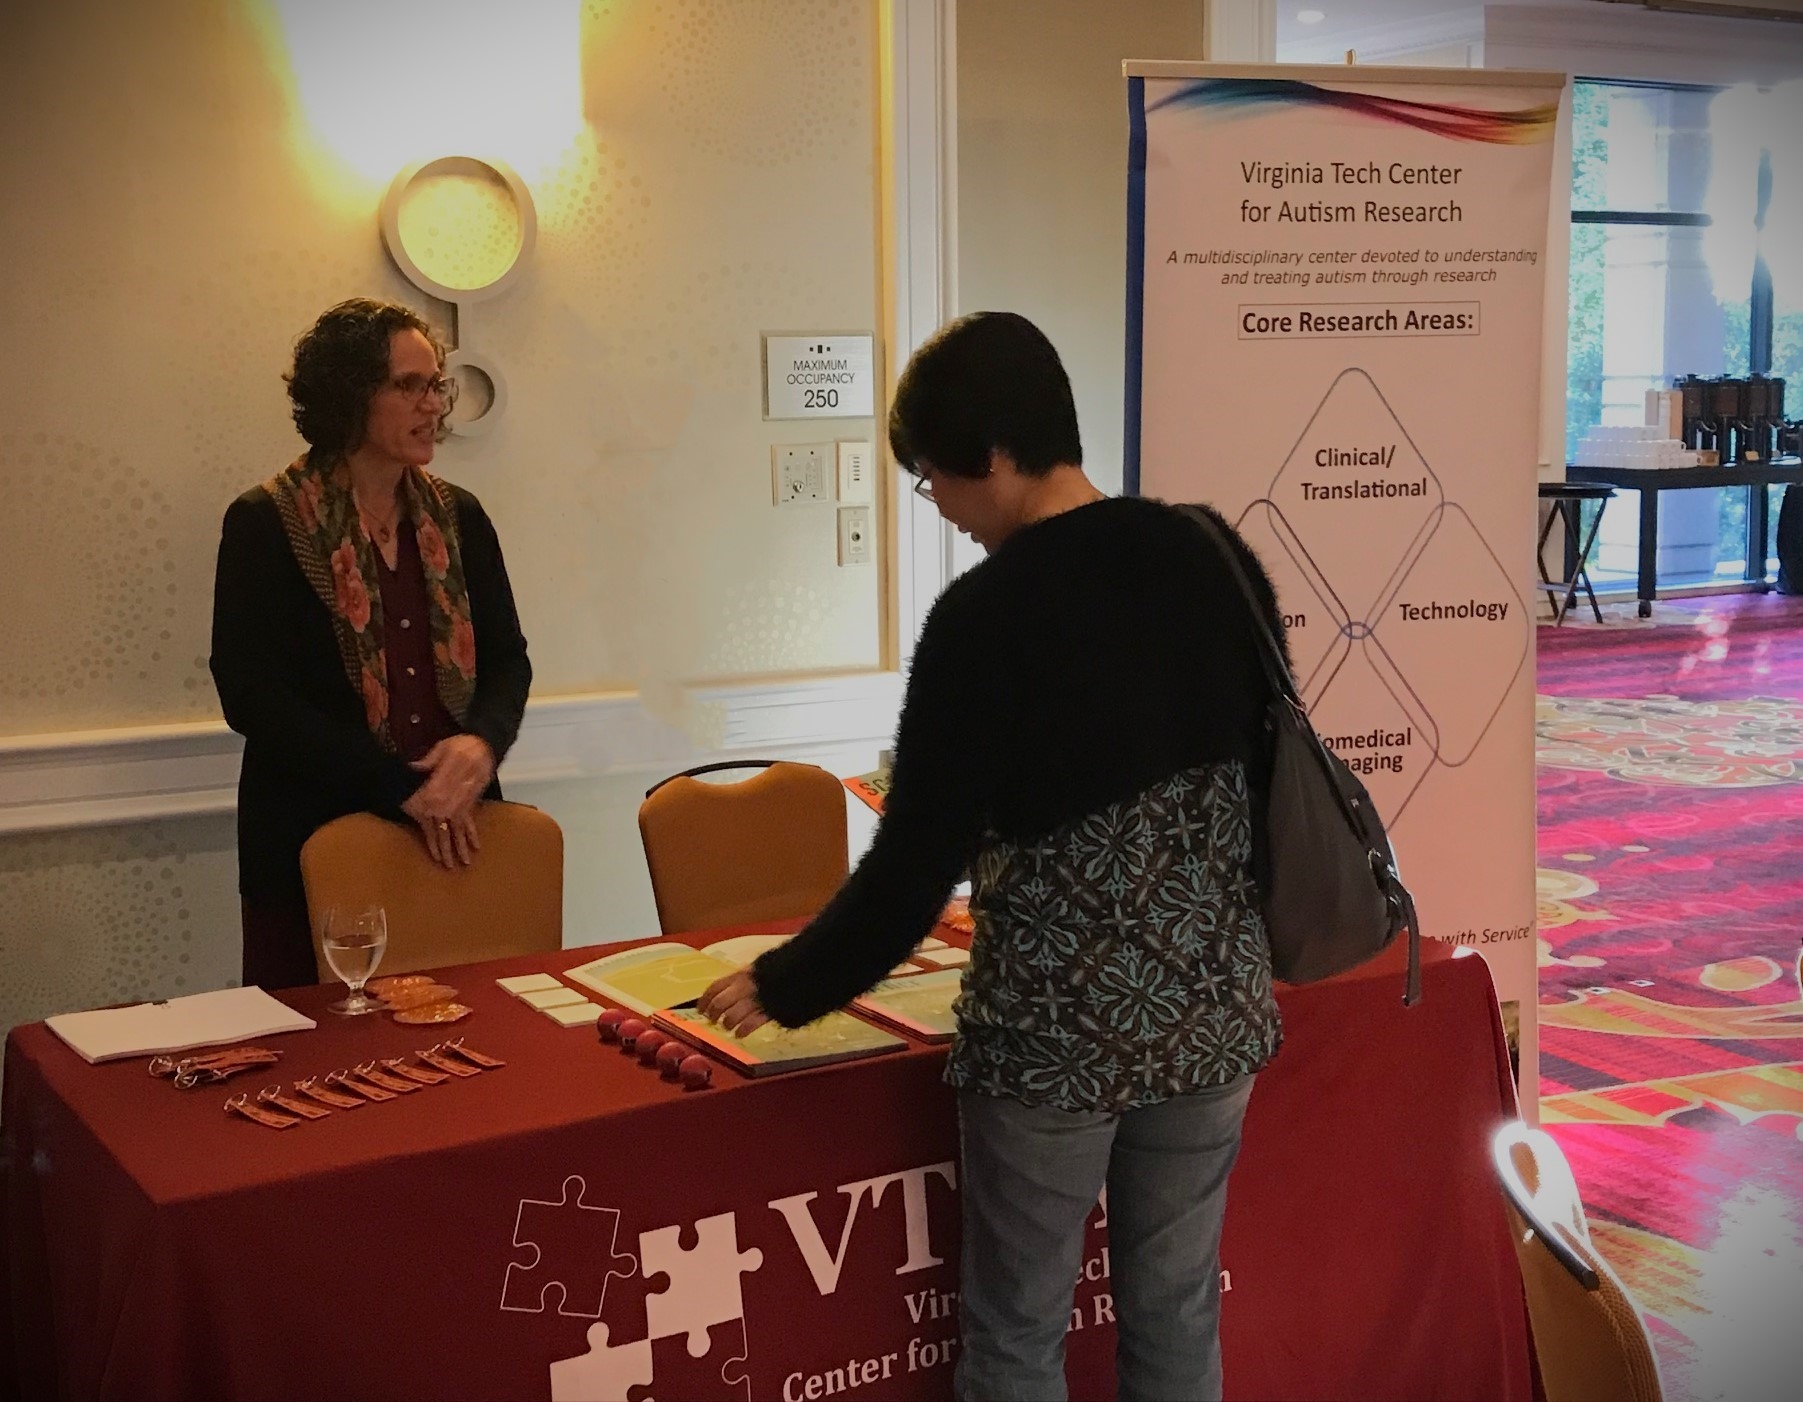 Director standing behind exhibitor table during a 2019 conference with an attendee picking up a flyer from the table.